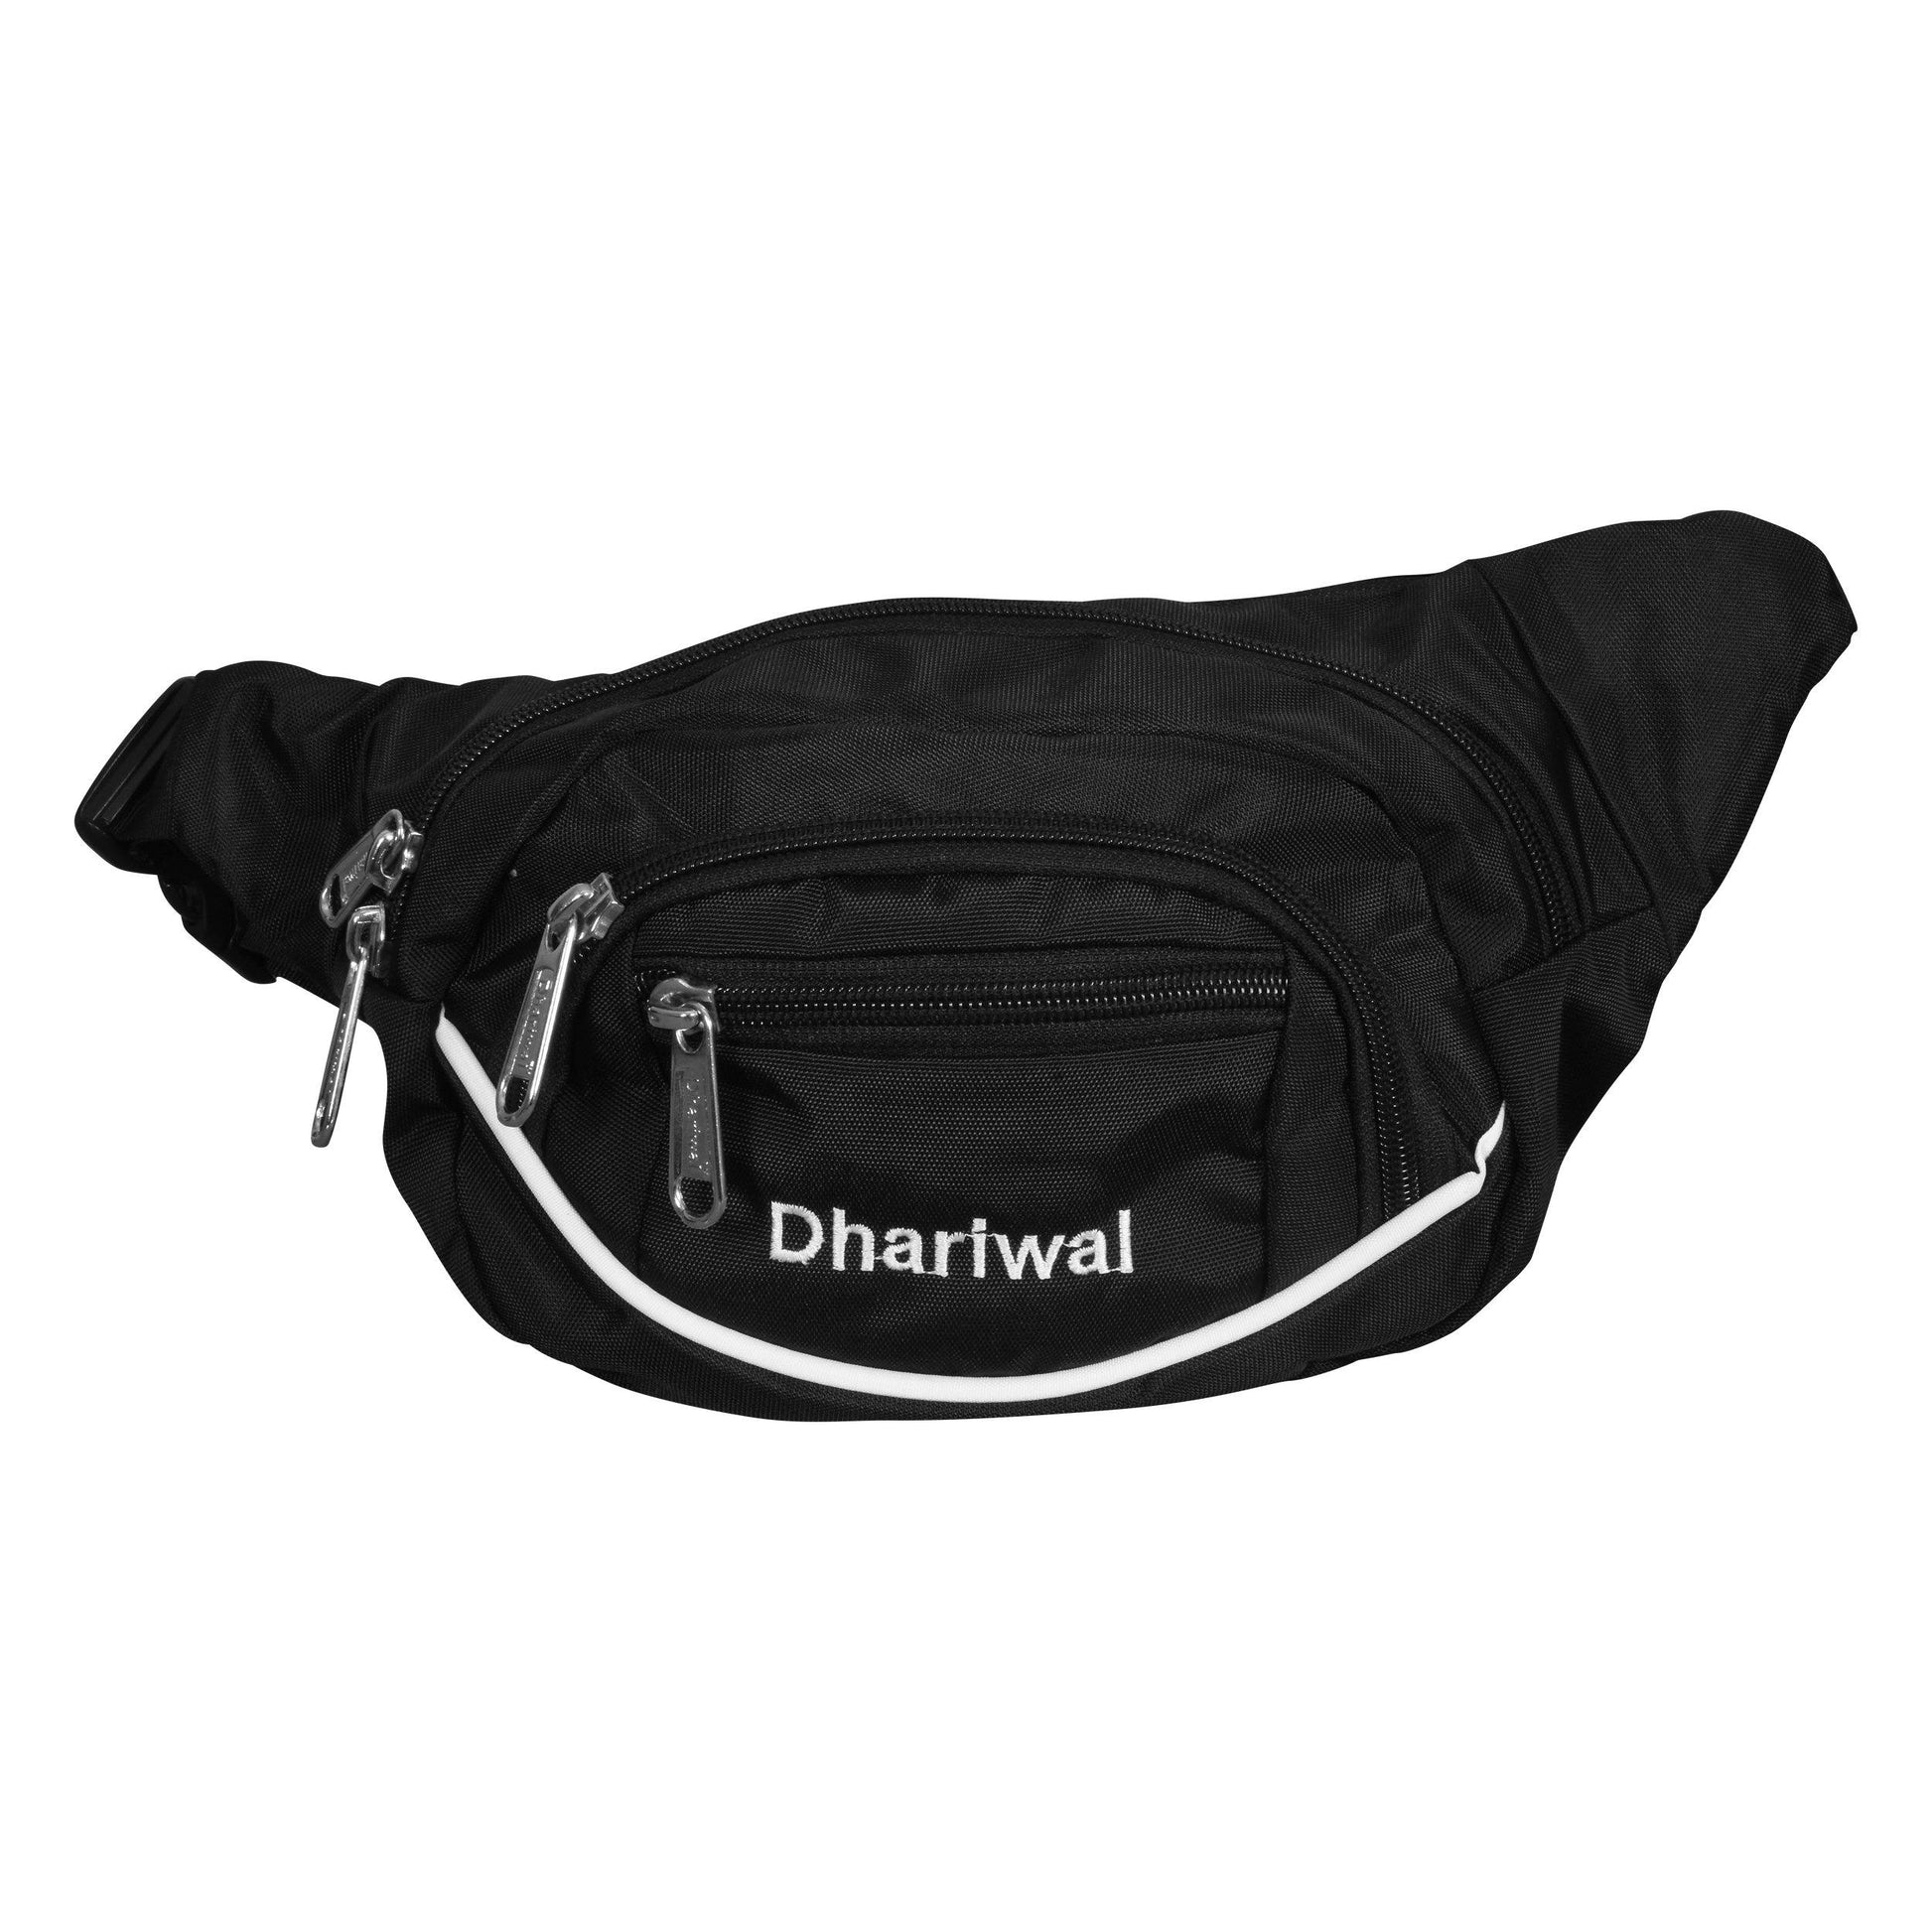 Dhariwal Waist Pack Travel Handy Hiking Zip Pouch Document Money Phone Belt Sport Bag Bum Bag for Men and Women Polyester WP-1202 Waist Pouch Dhariwal Black 